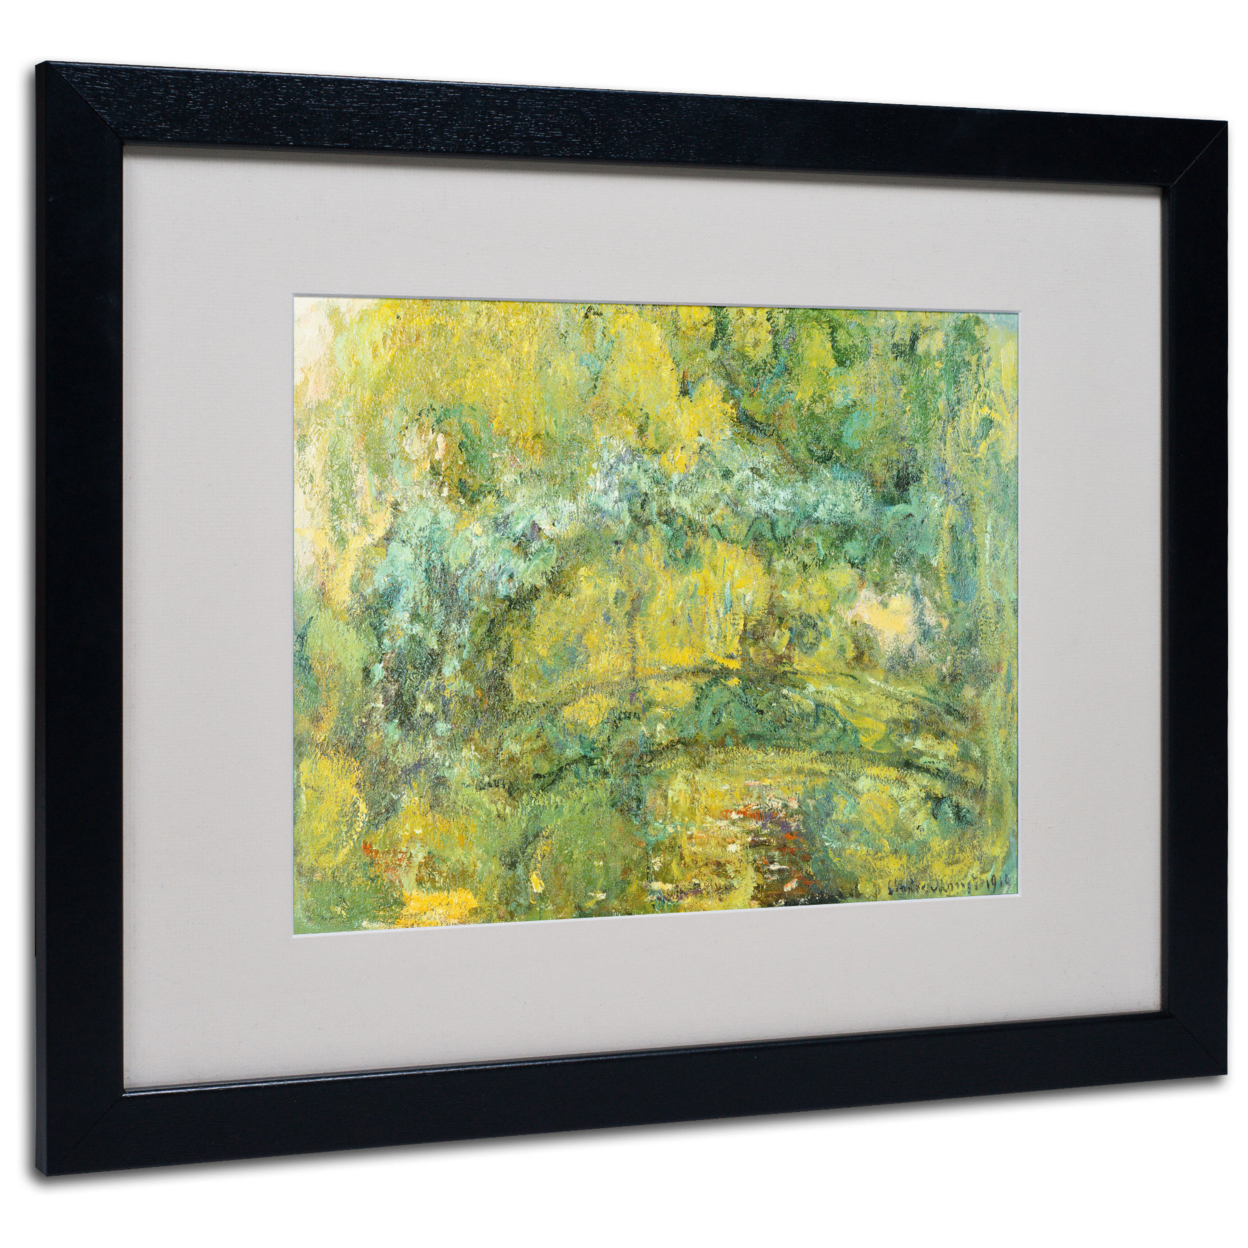 Claude Monet 'Passage On Waterlily Pond' Black Wooden Framed Art 18 X 22 Inches